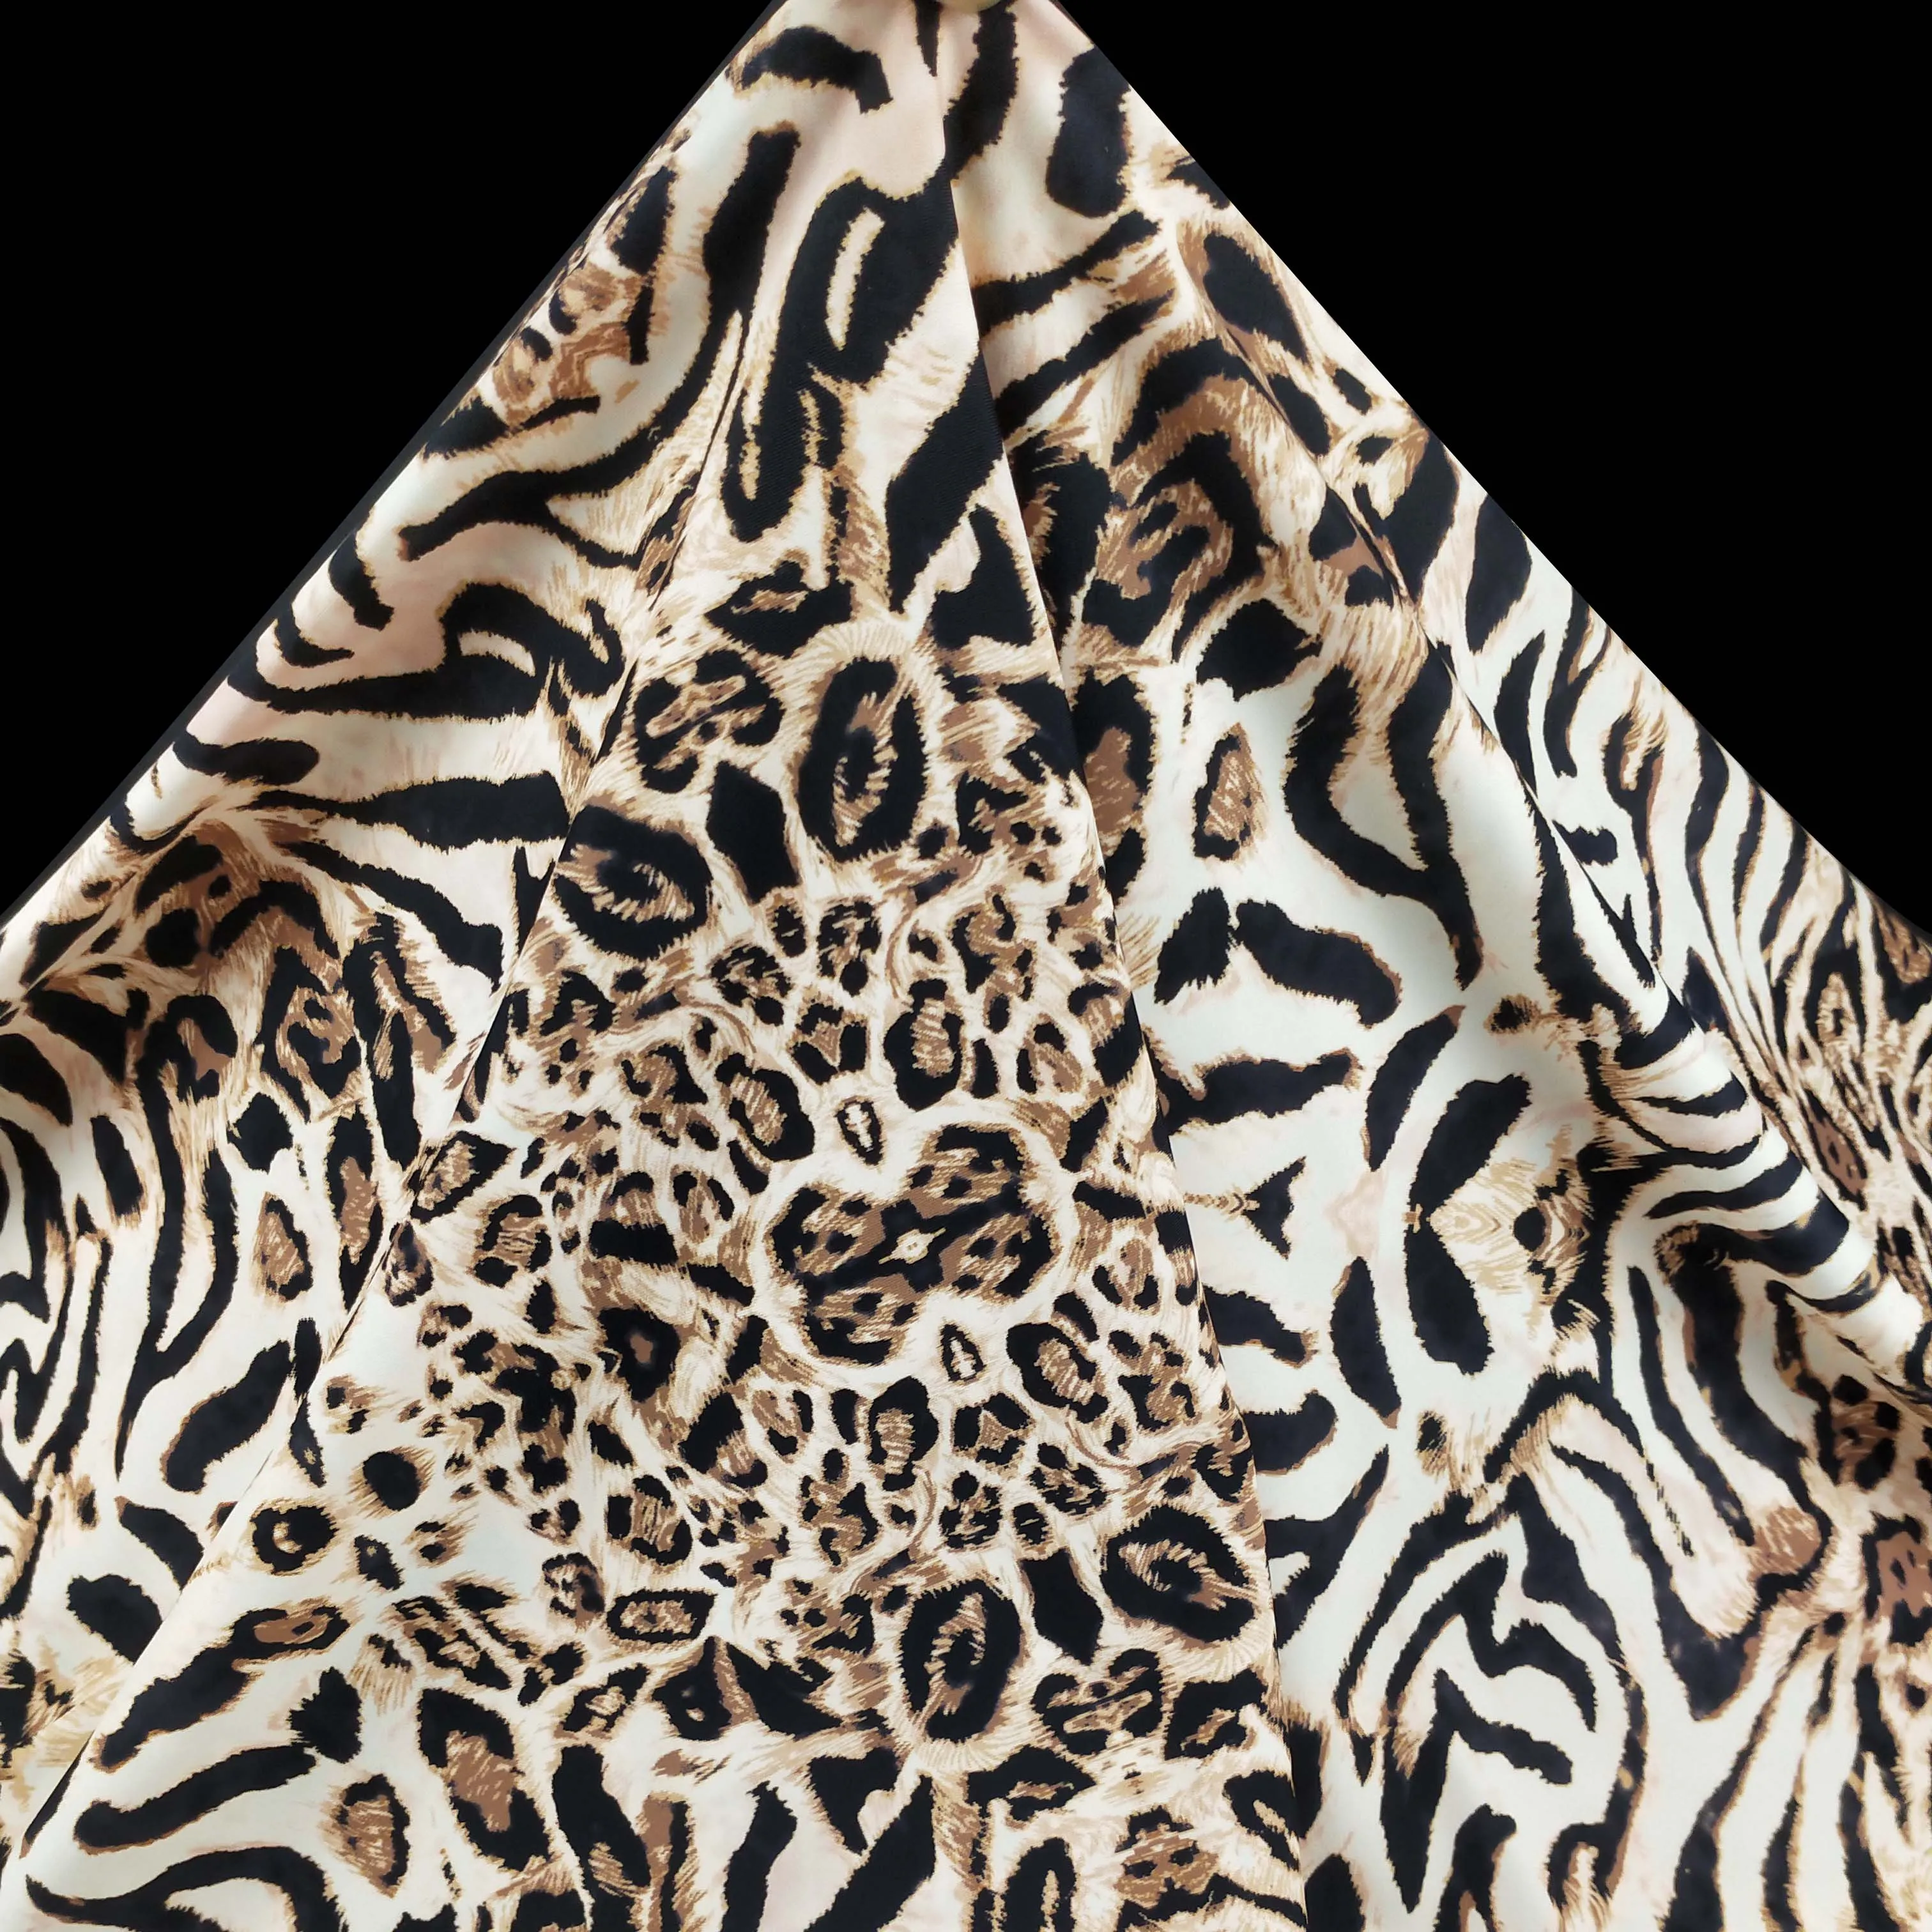 
smooth brown leopard animal printed lycra spandex fabric for swimsuit or underwear 